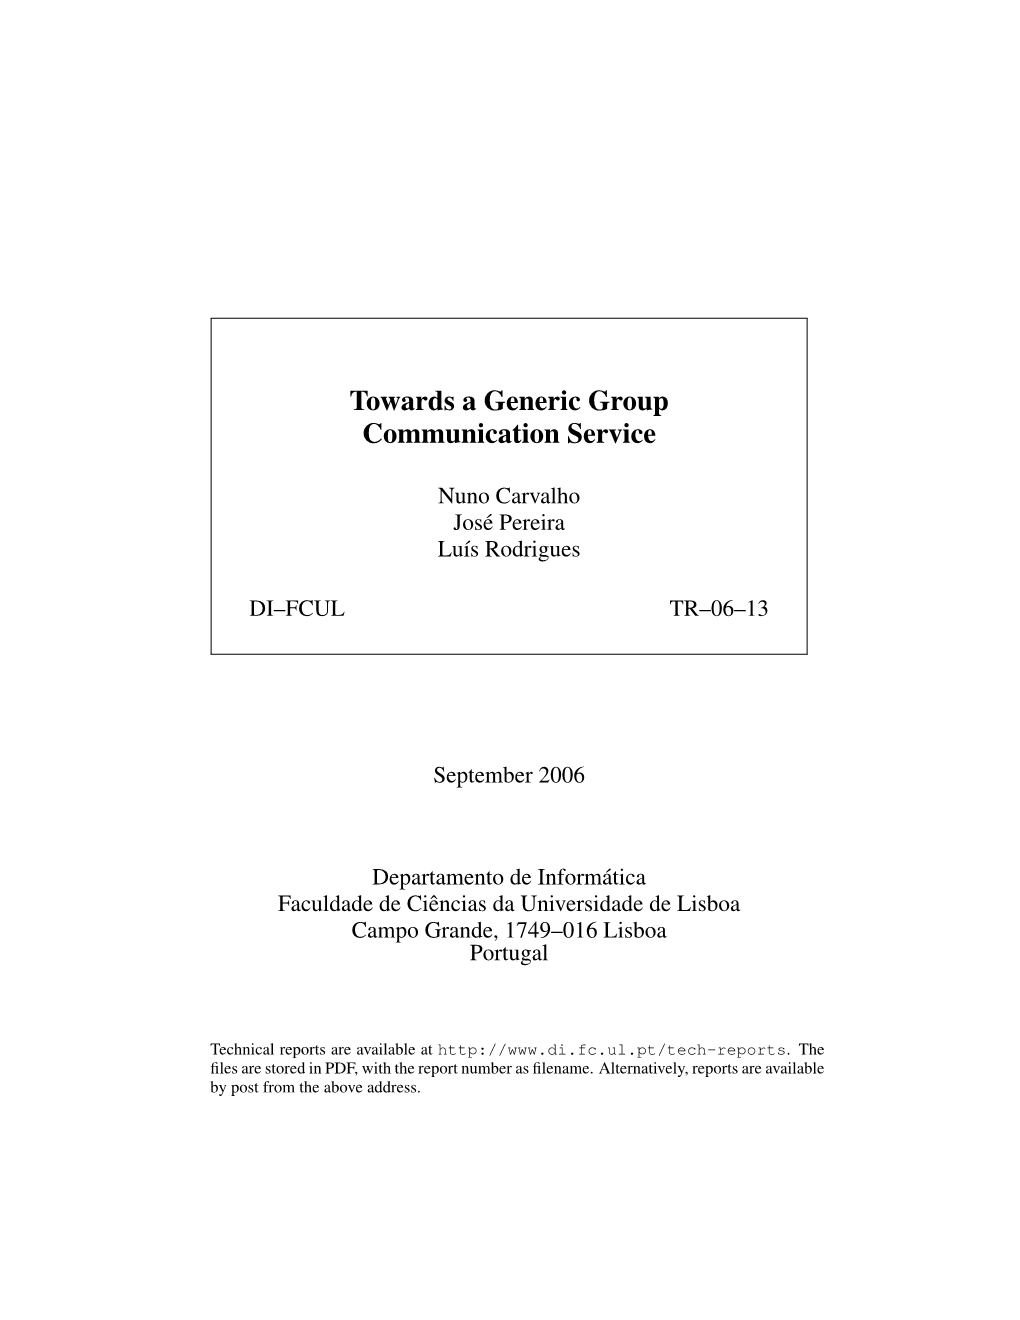 Towards a Generic Group Communication Service